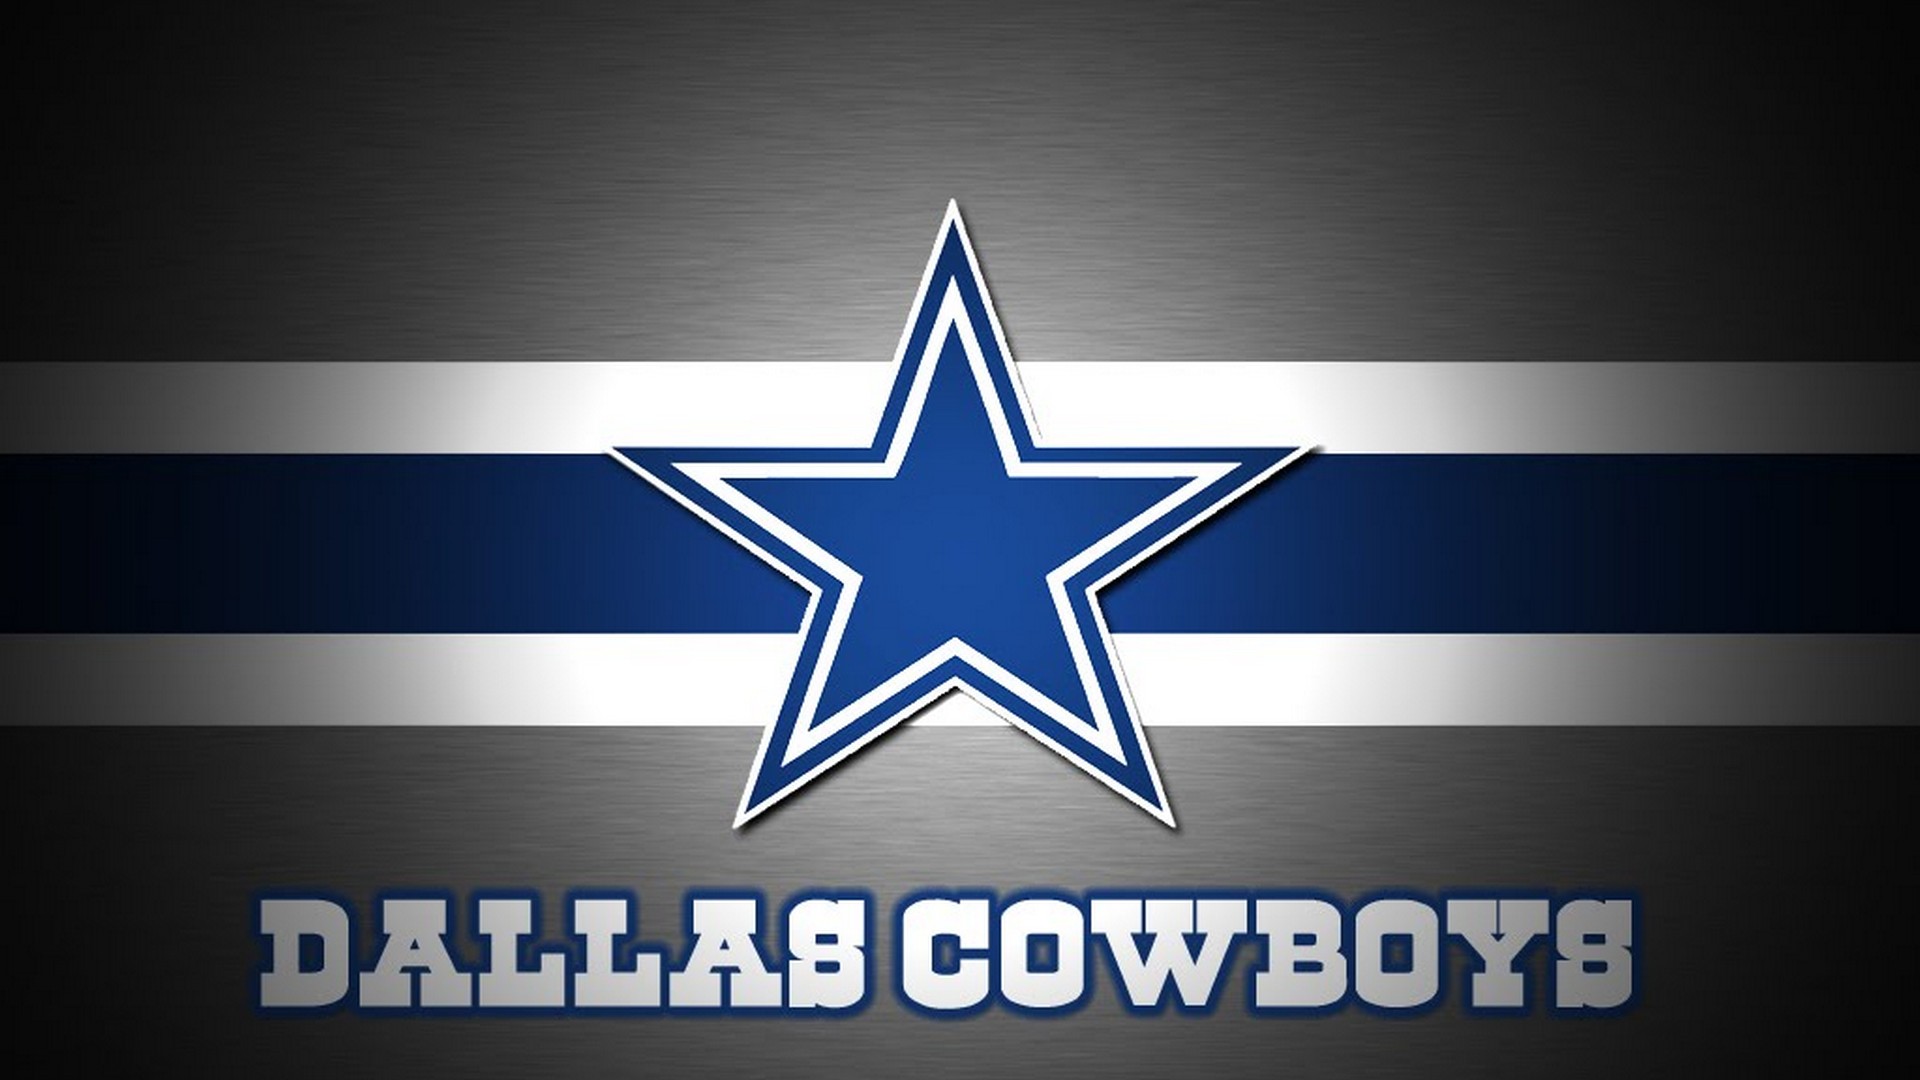 Wallpaper Desktop Dallas Cowboys NFL HD with high-resolution 1920x1080 pixel. You can use this wallpaper for your Mac or Windows Desktop Background, iPhone, Android or Tablet and another Smartphone device